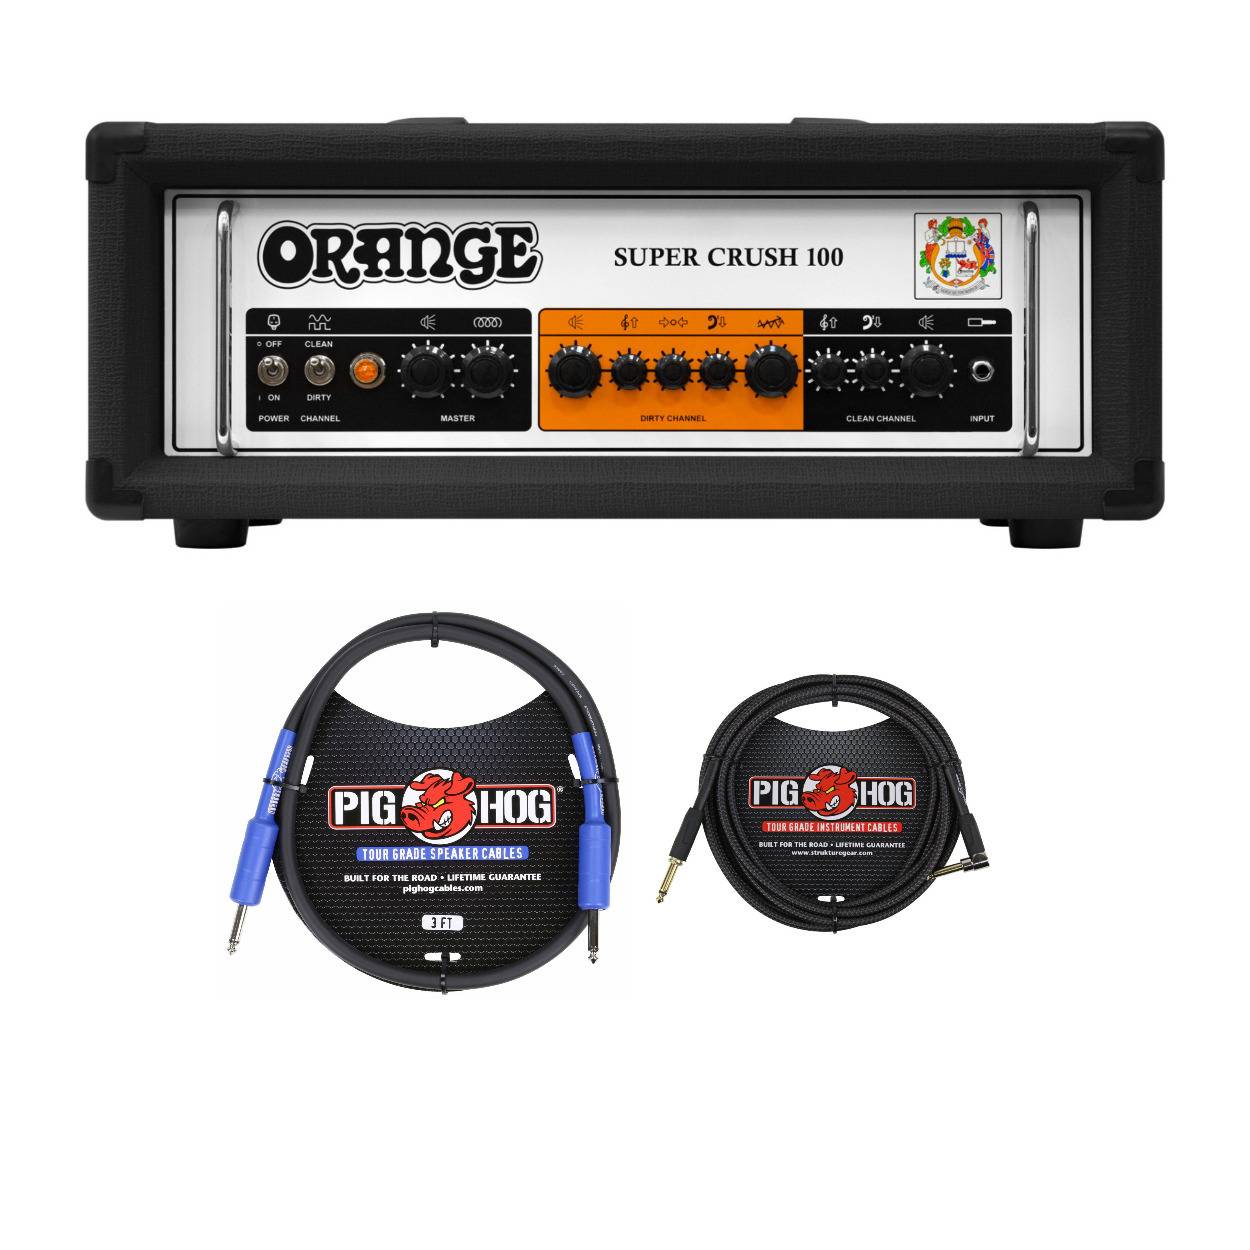 Orange Amps Super Crush 100W Amplifier Head (Black) with 3-Feet Speaker Cable and Guitar Cable